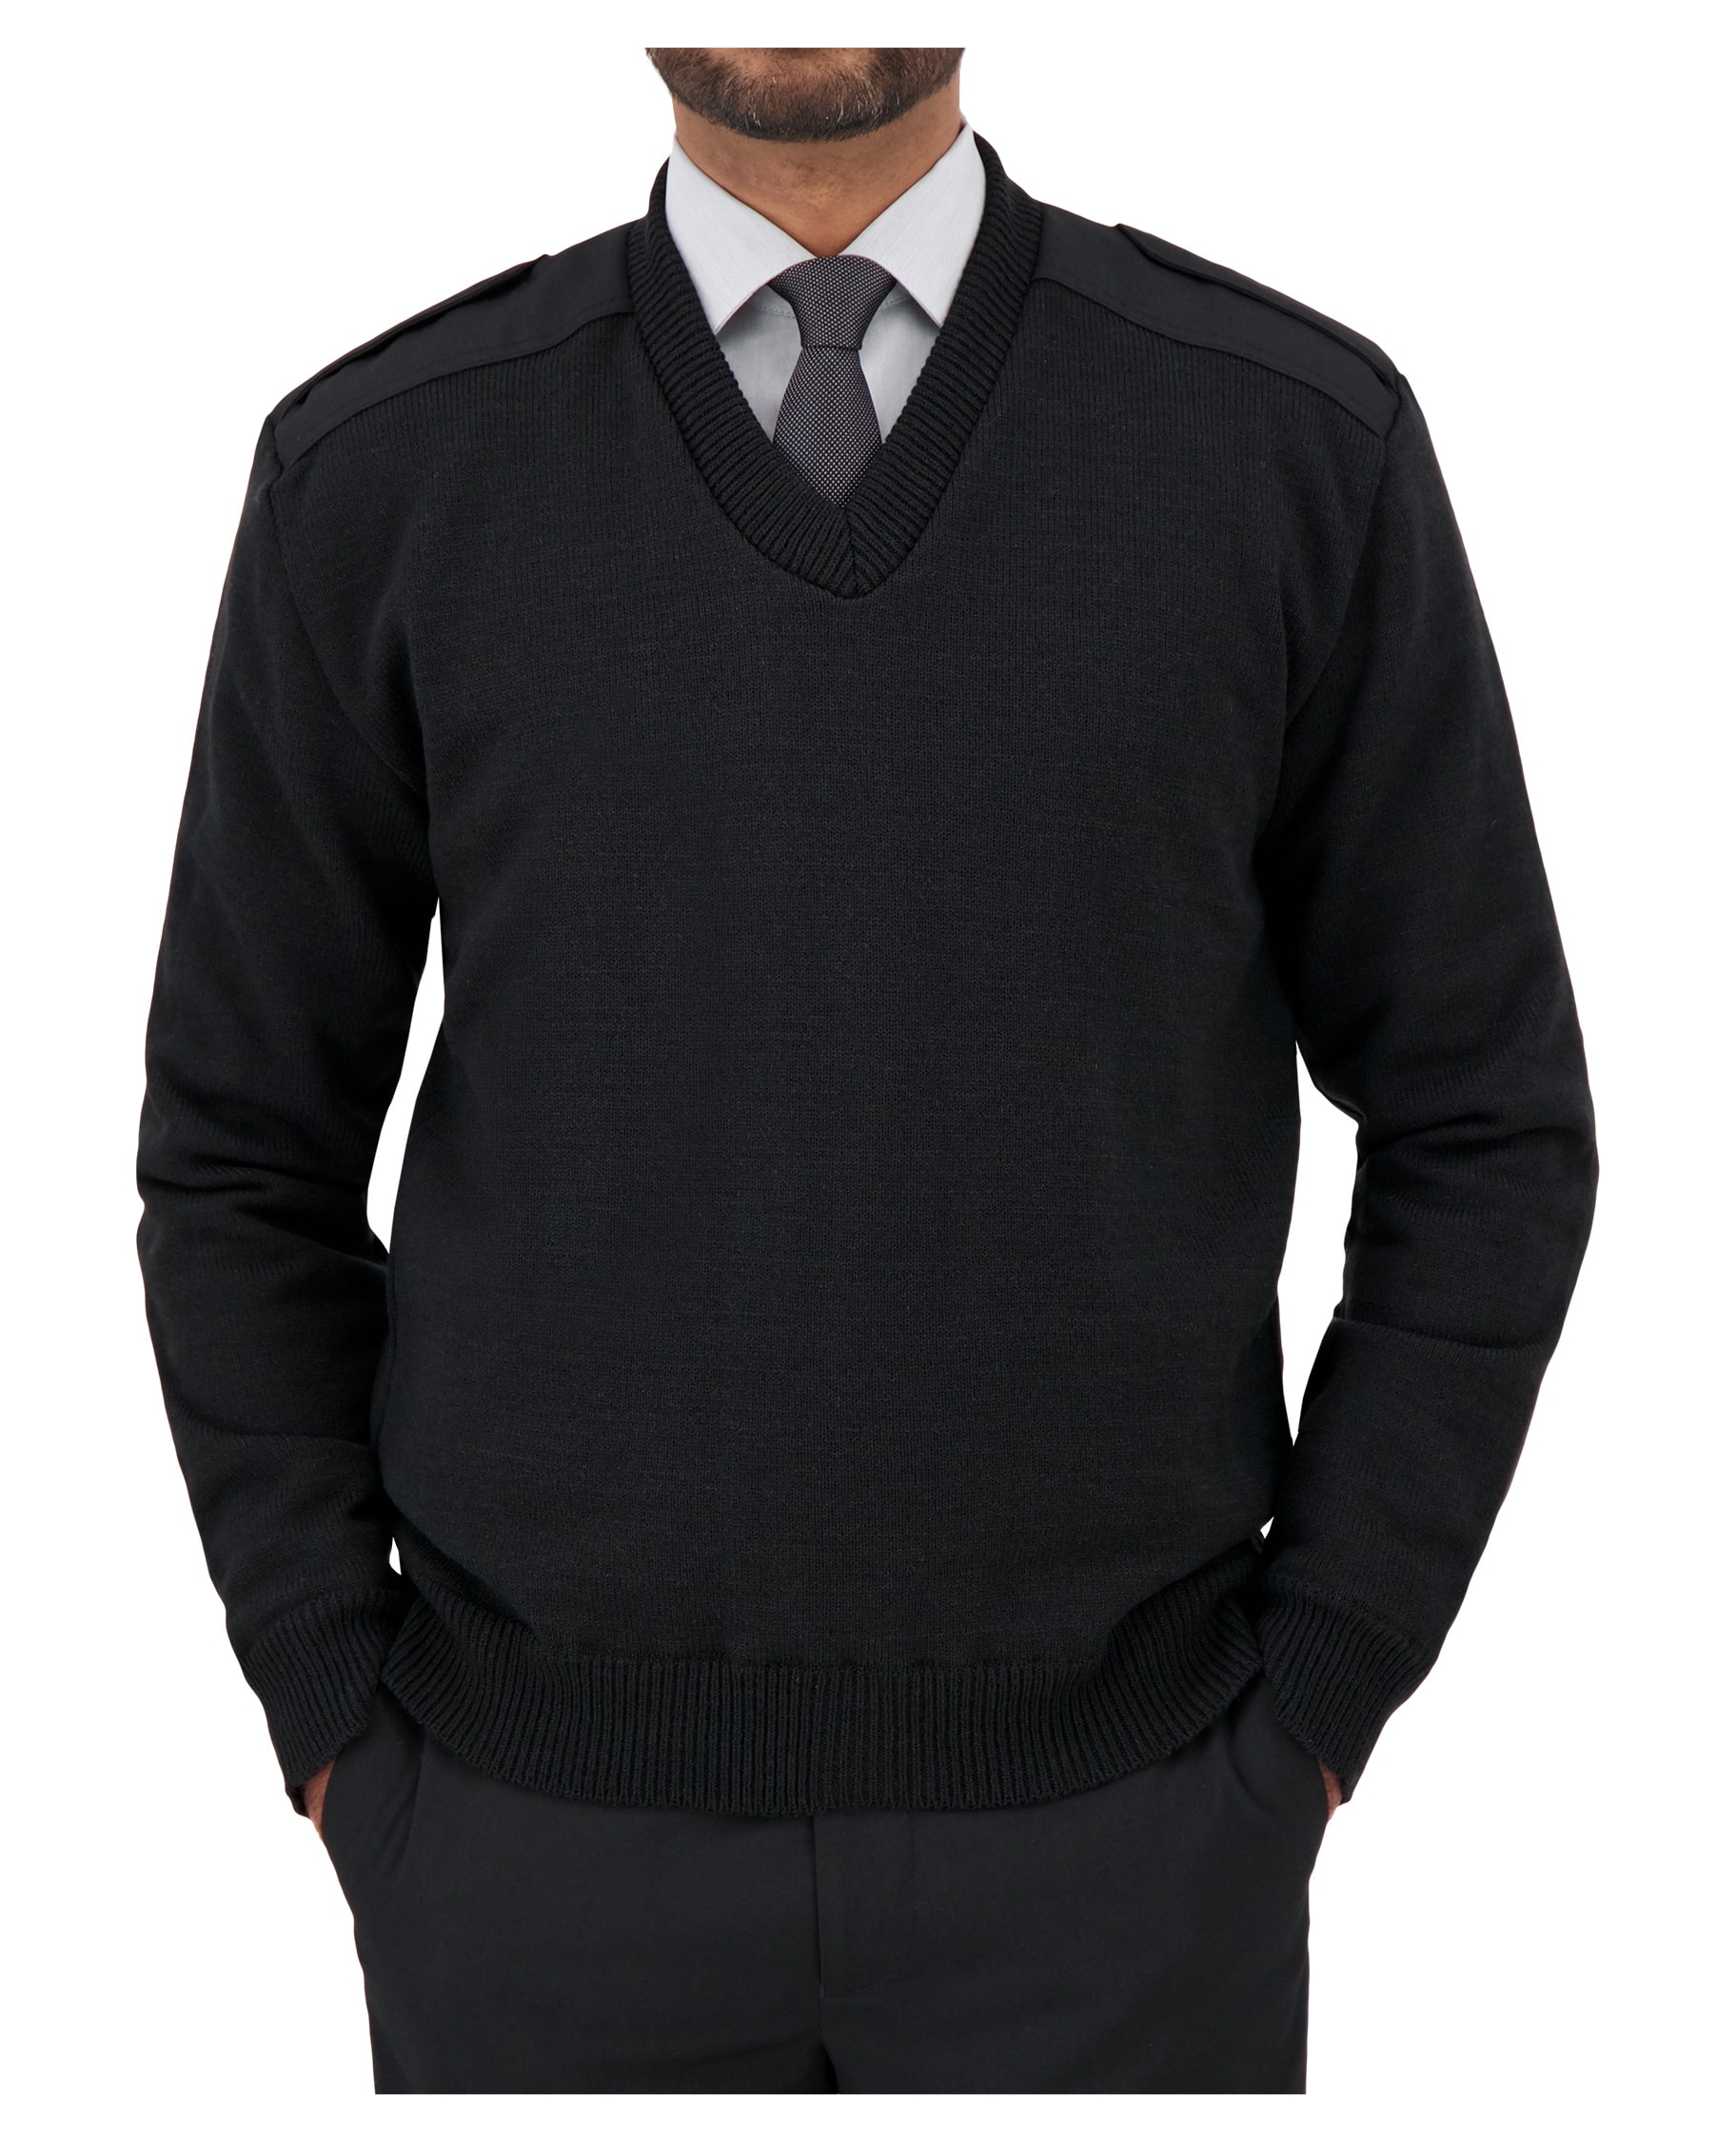 black v-neck sweater with shoulder and elbow patches